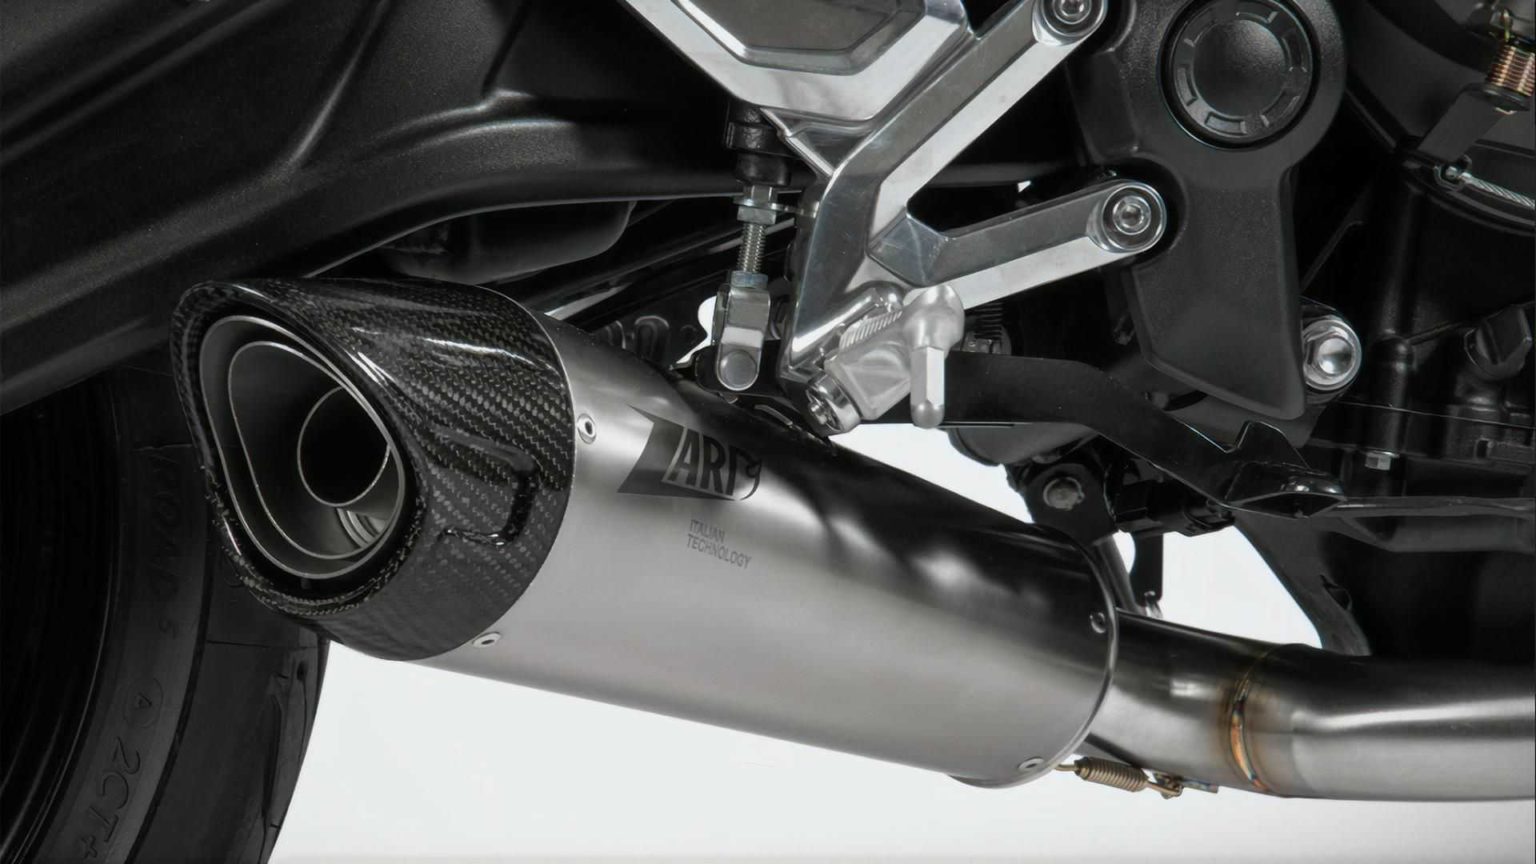 Zard brings full Euro 5 aligned exhaust system for Triumph Trident 660 ...